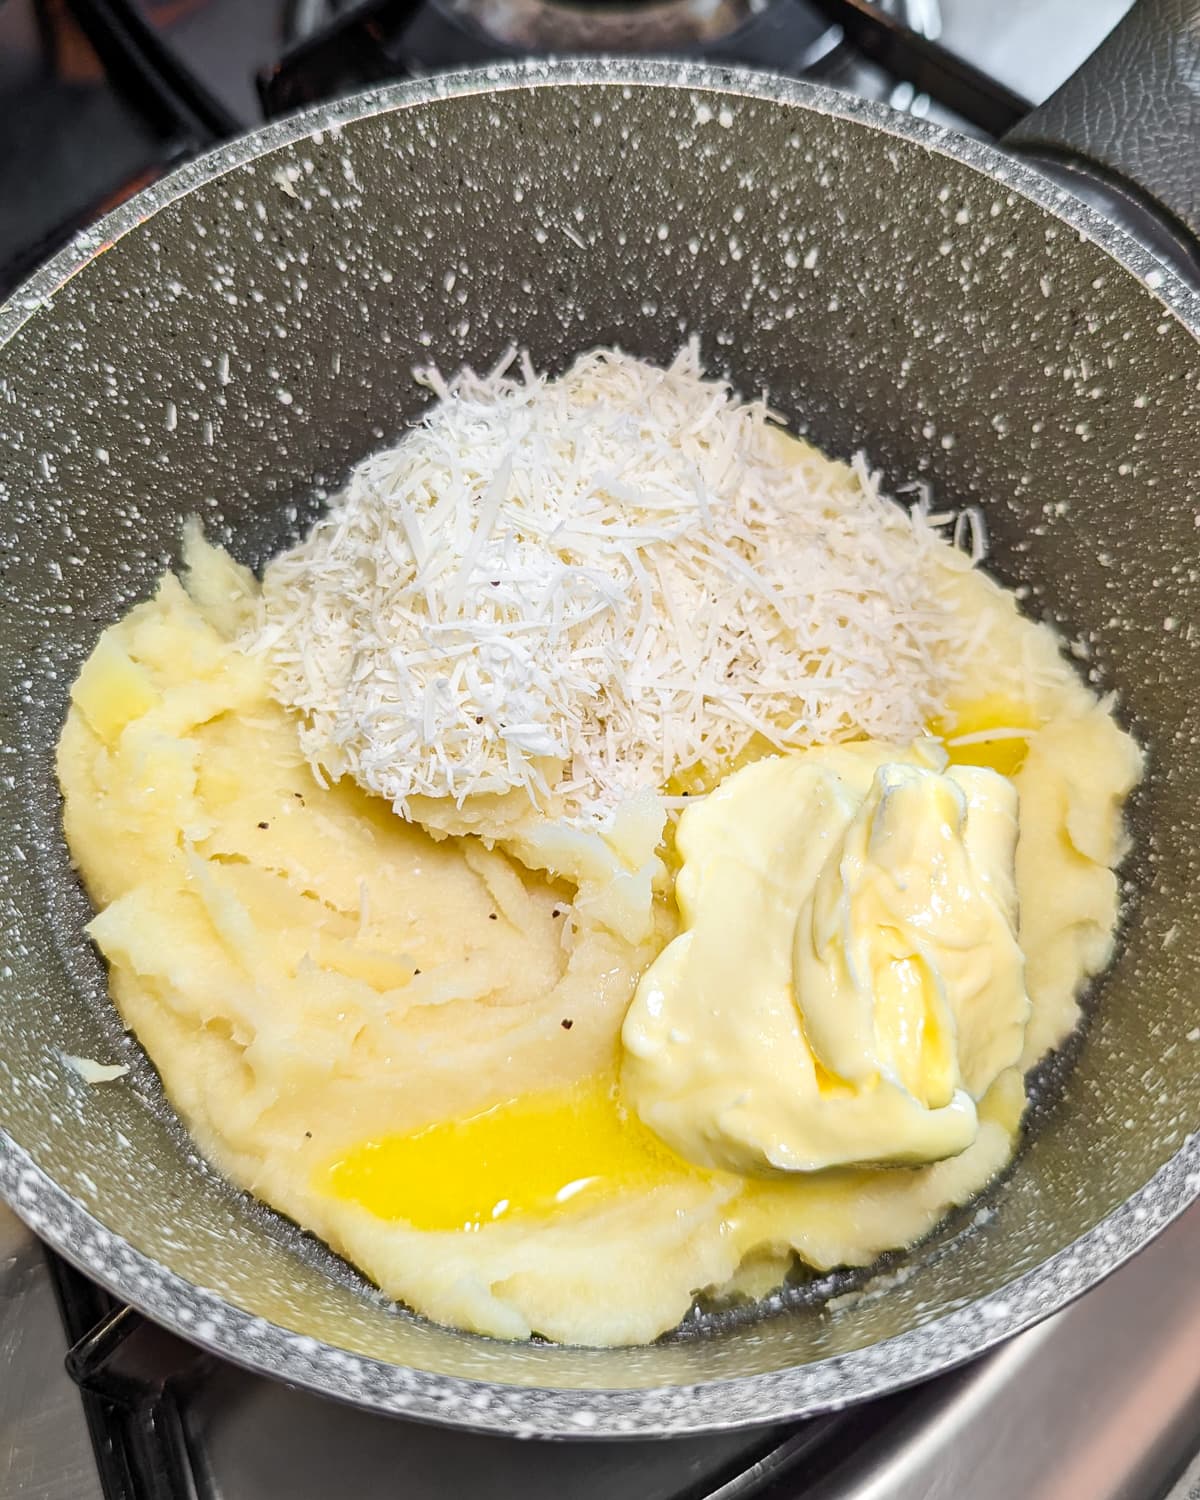 Pan with mashed parsnips, grated parmesan and melted butter.